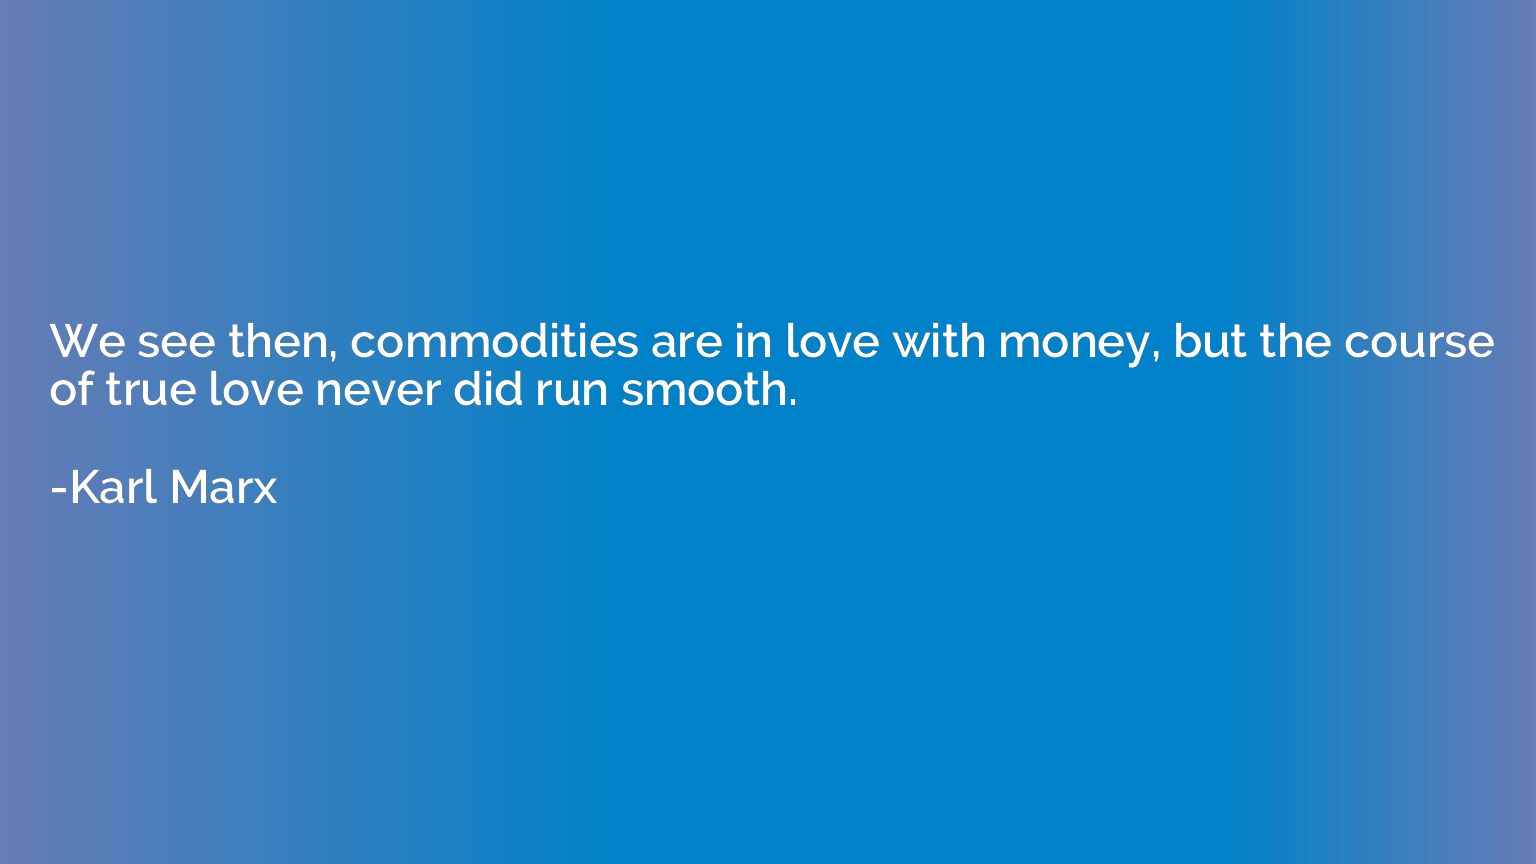 We see then, commodities are in love with money, but the cou